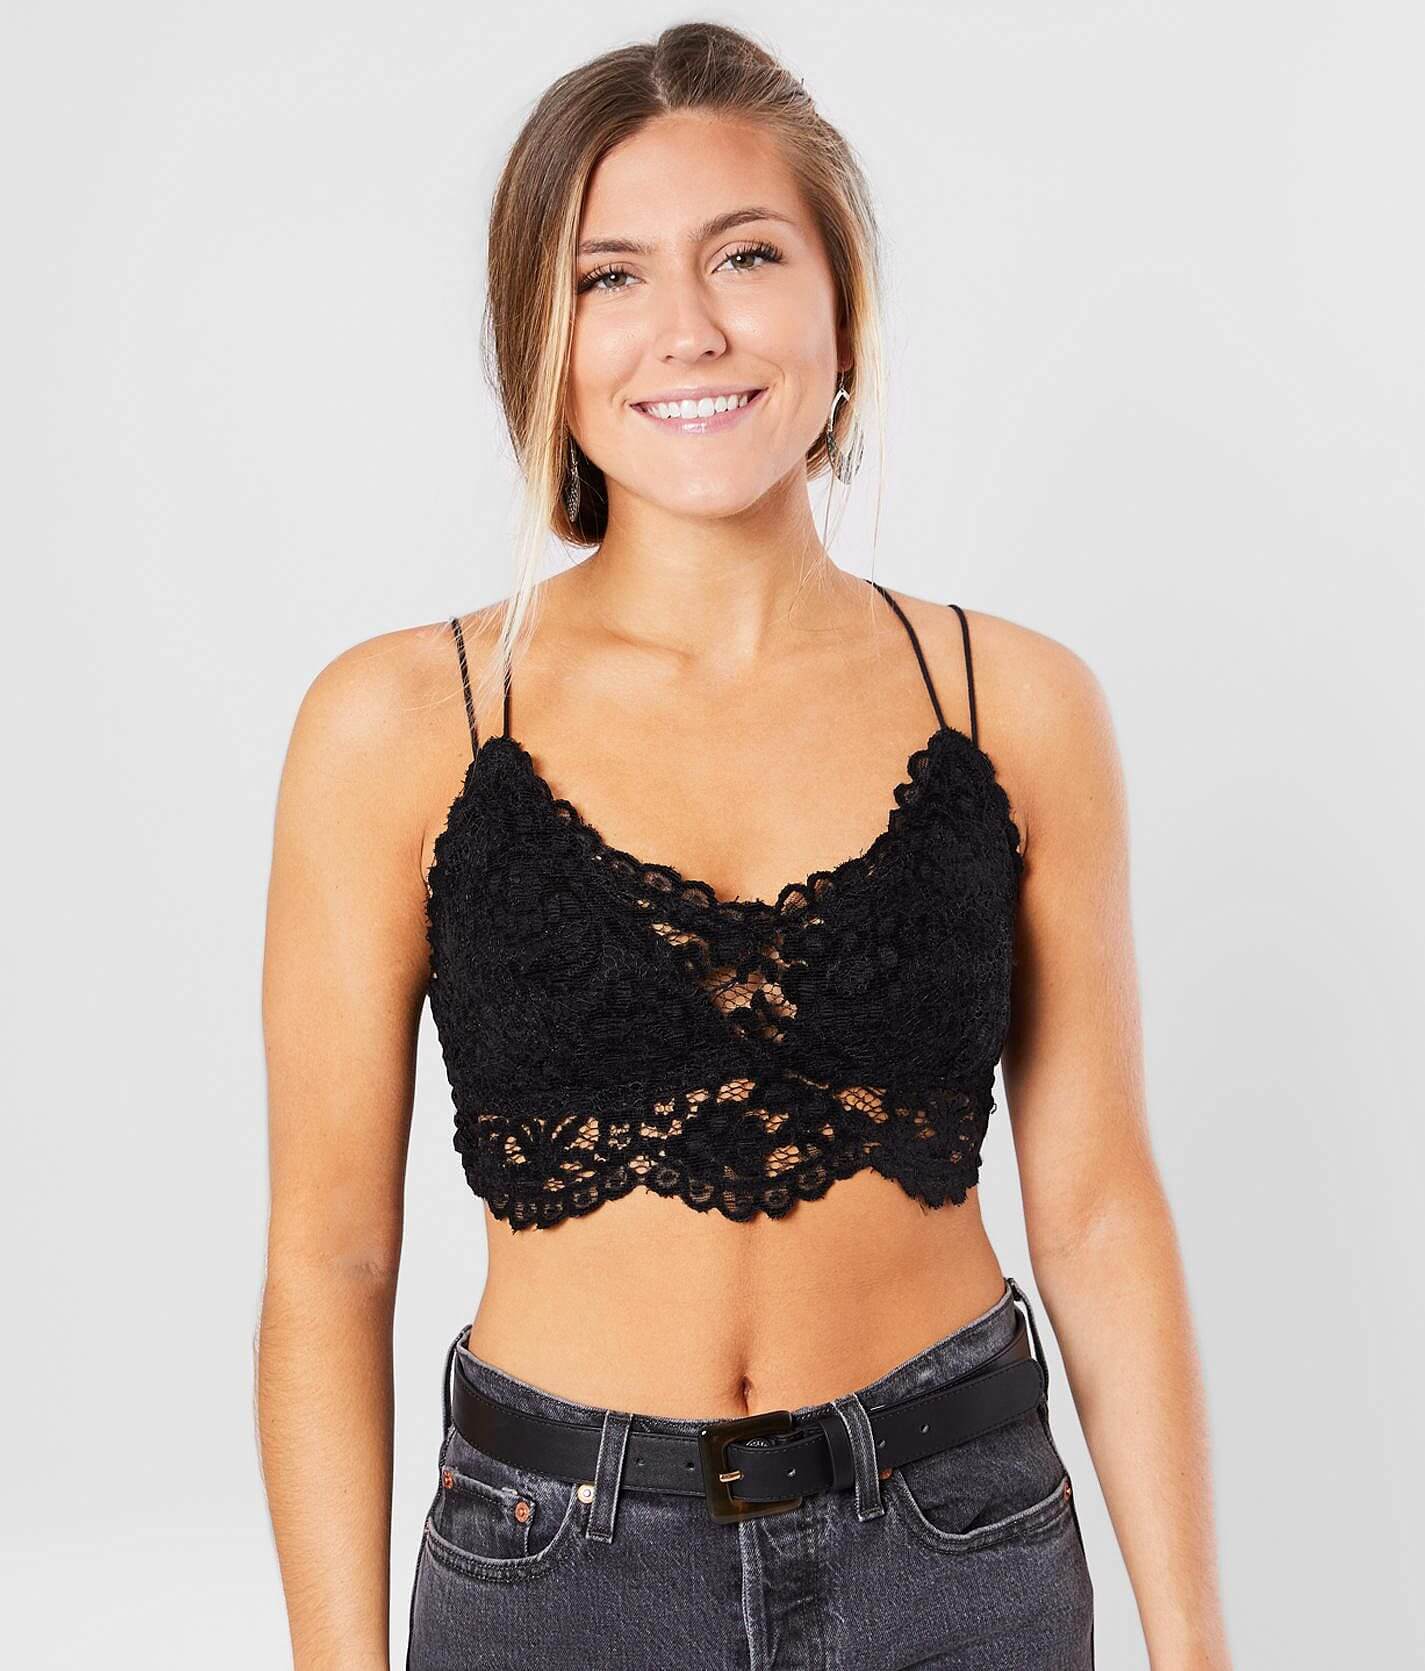 Free People • NWT Celine Lace Mulberry Bralette Size XS - $19